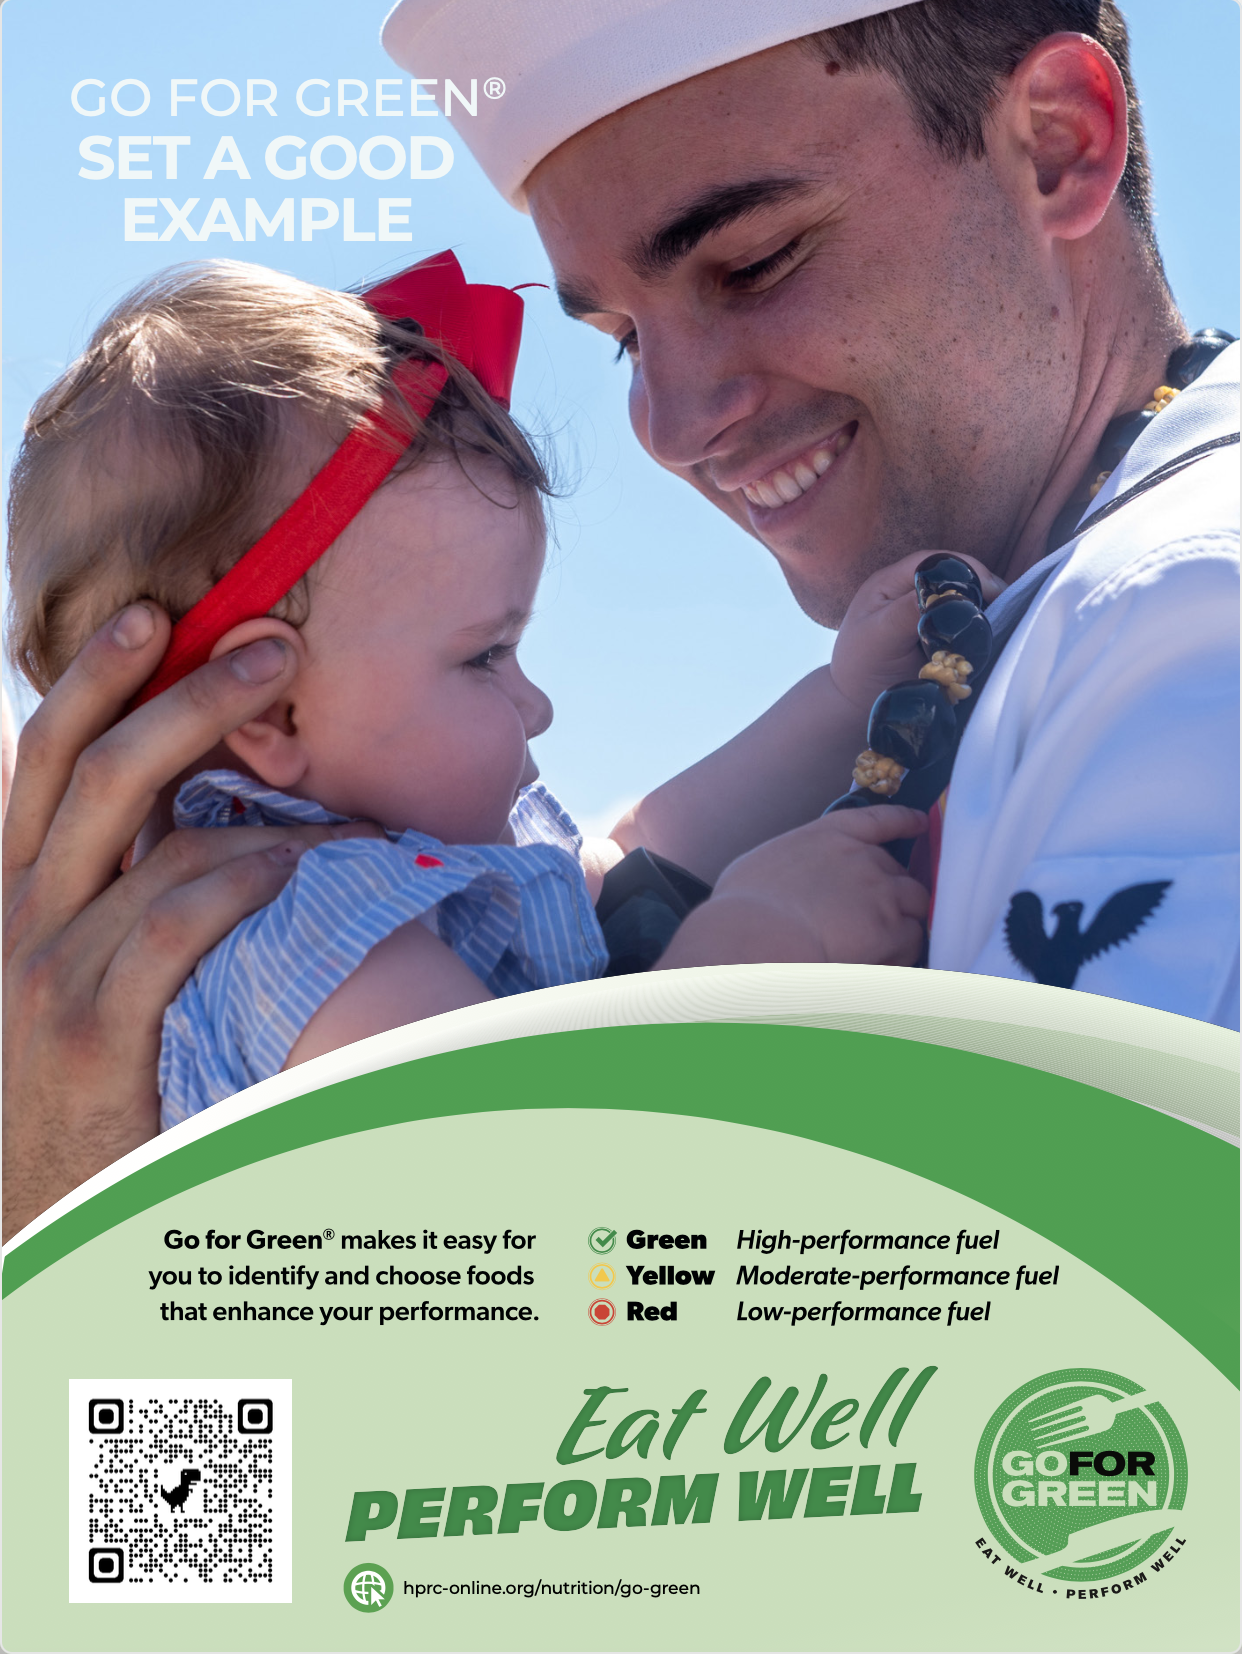 A Sailor holds his baby daughter. Set a good example. Go for Green makes it easy for you to identify and choose foods that enhance your performance. Green is high-performance fuel. Yellow is moderate-performance fuel. And Red is low-performance fuel. Eat well. Perform well. Go for Green.